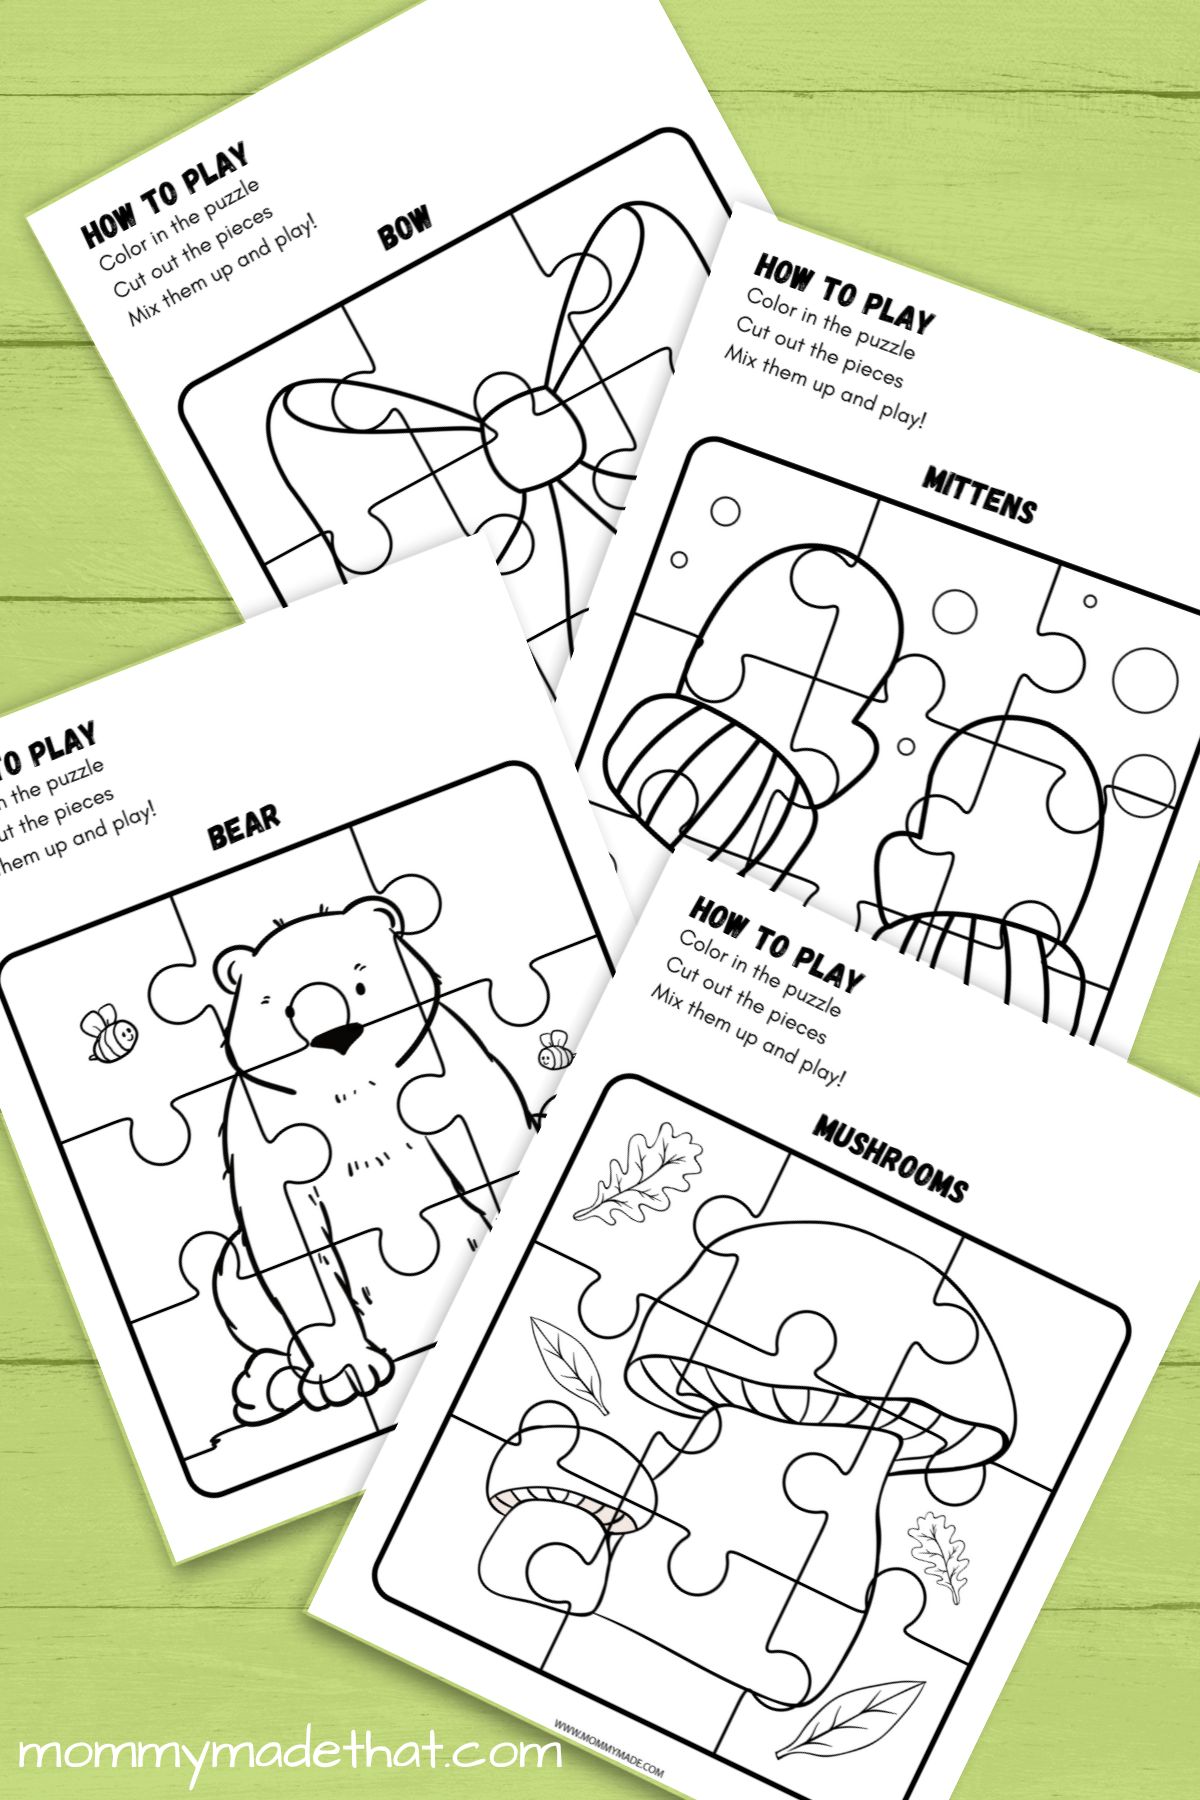 Coloring Puzzles (Free Printable Puzzle Coloring Pages)